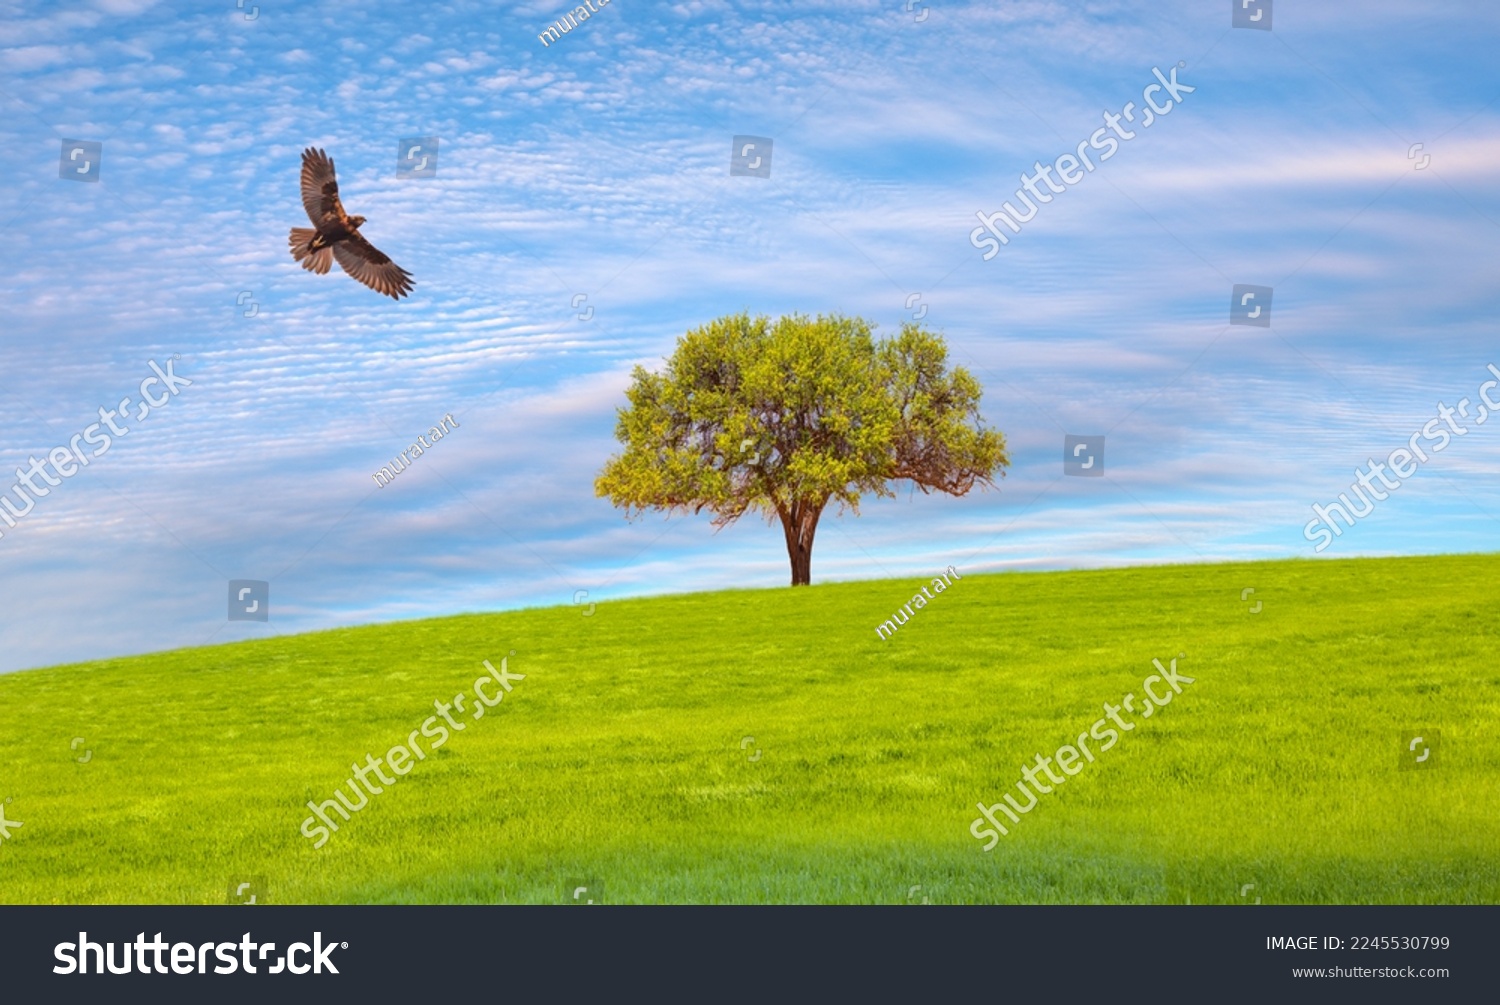 Red-tailed Hawk flying over green grass field with lone tree #2245530799